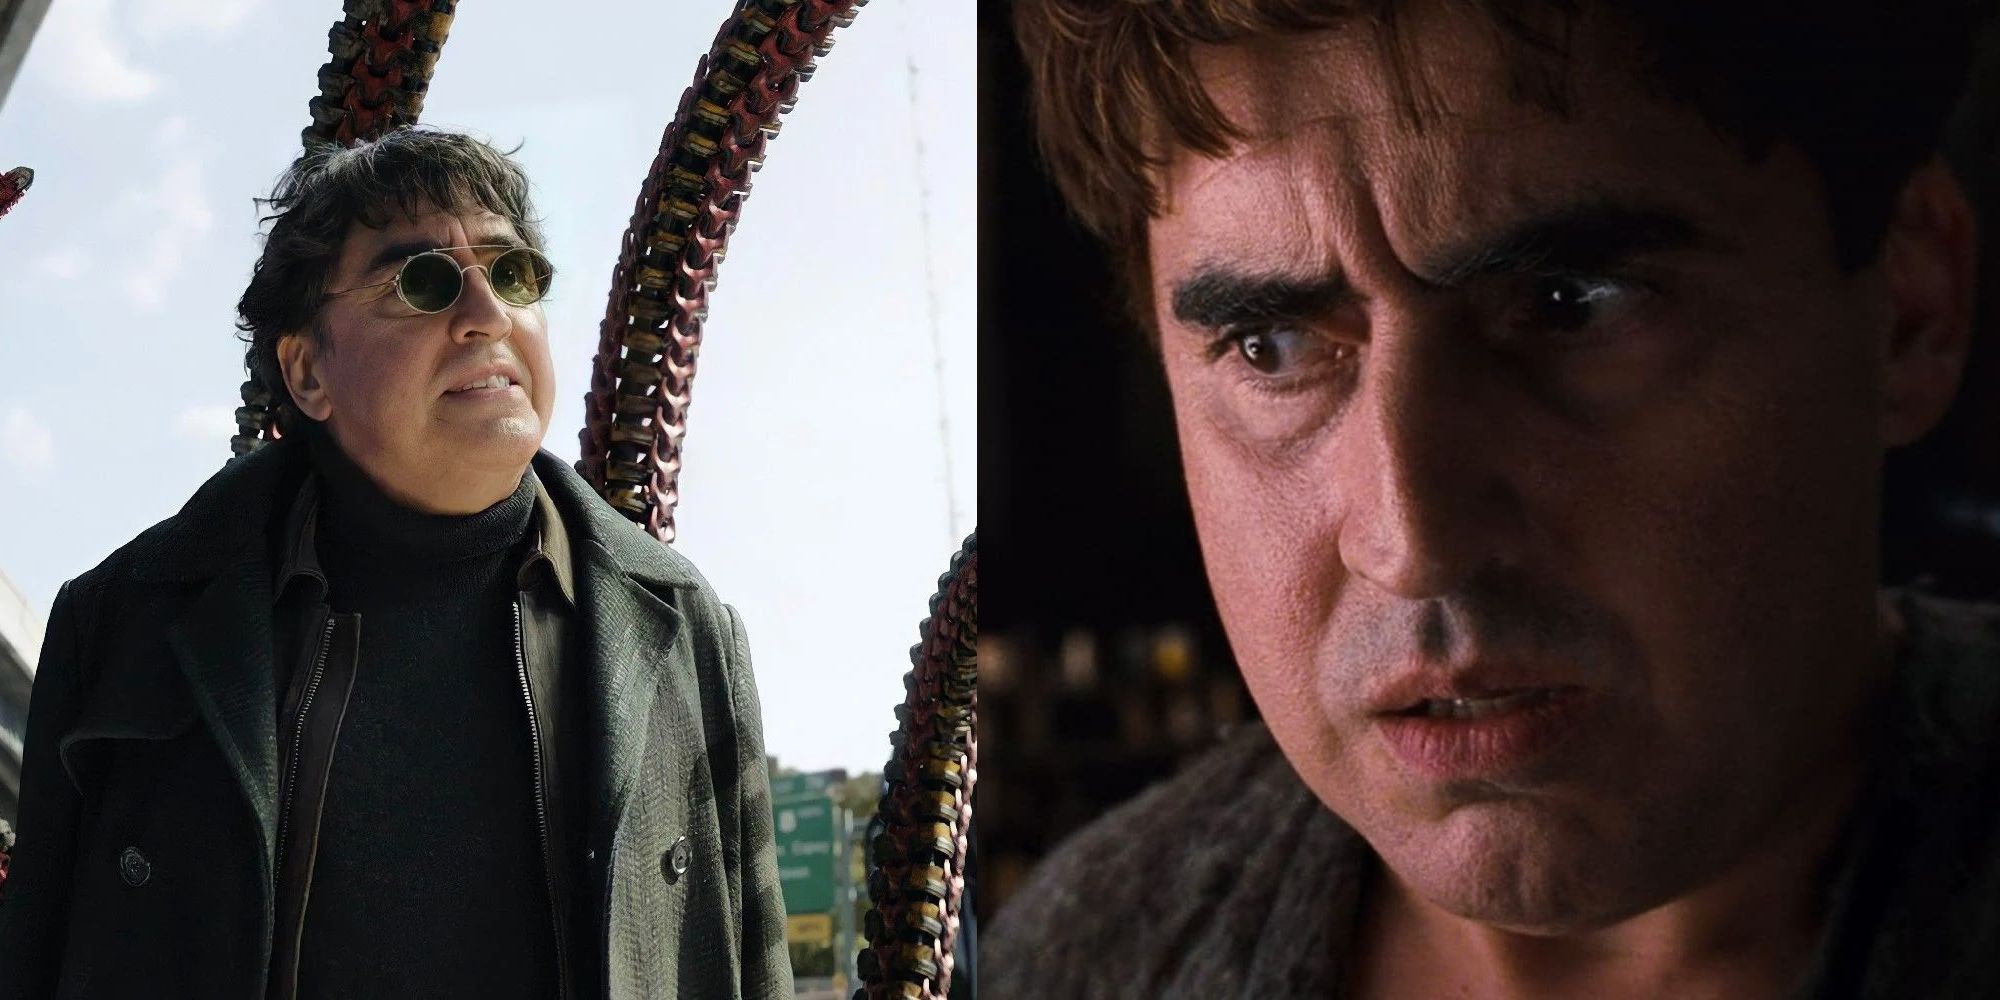 Spider-Man 3 casts Alfred Molina as Doctor Octopus opposite Tom